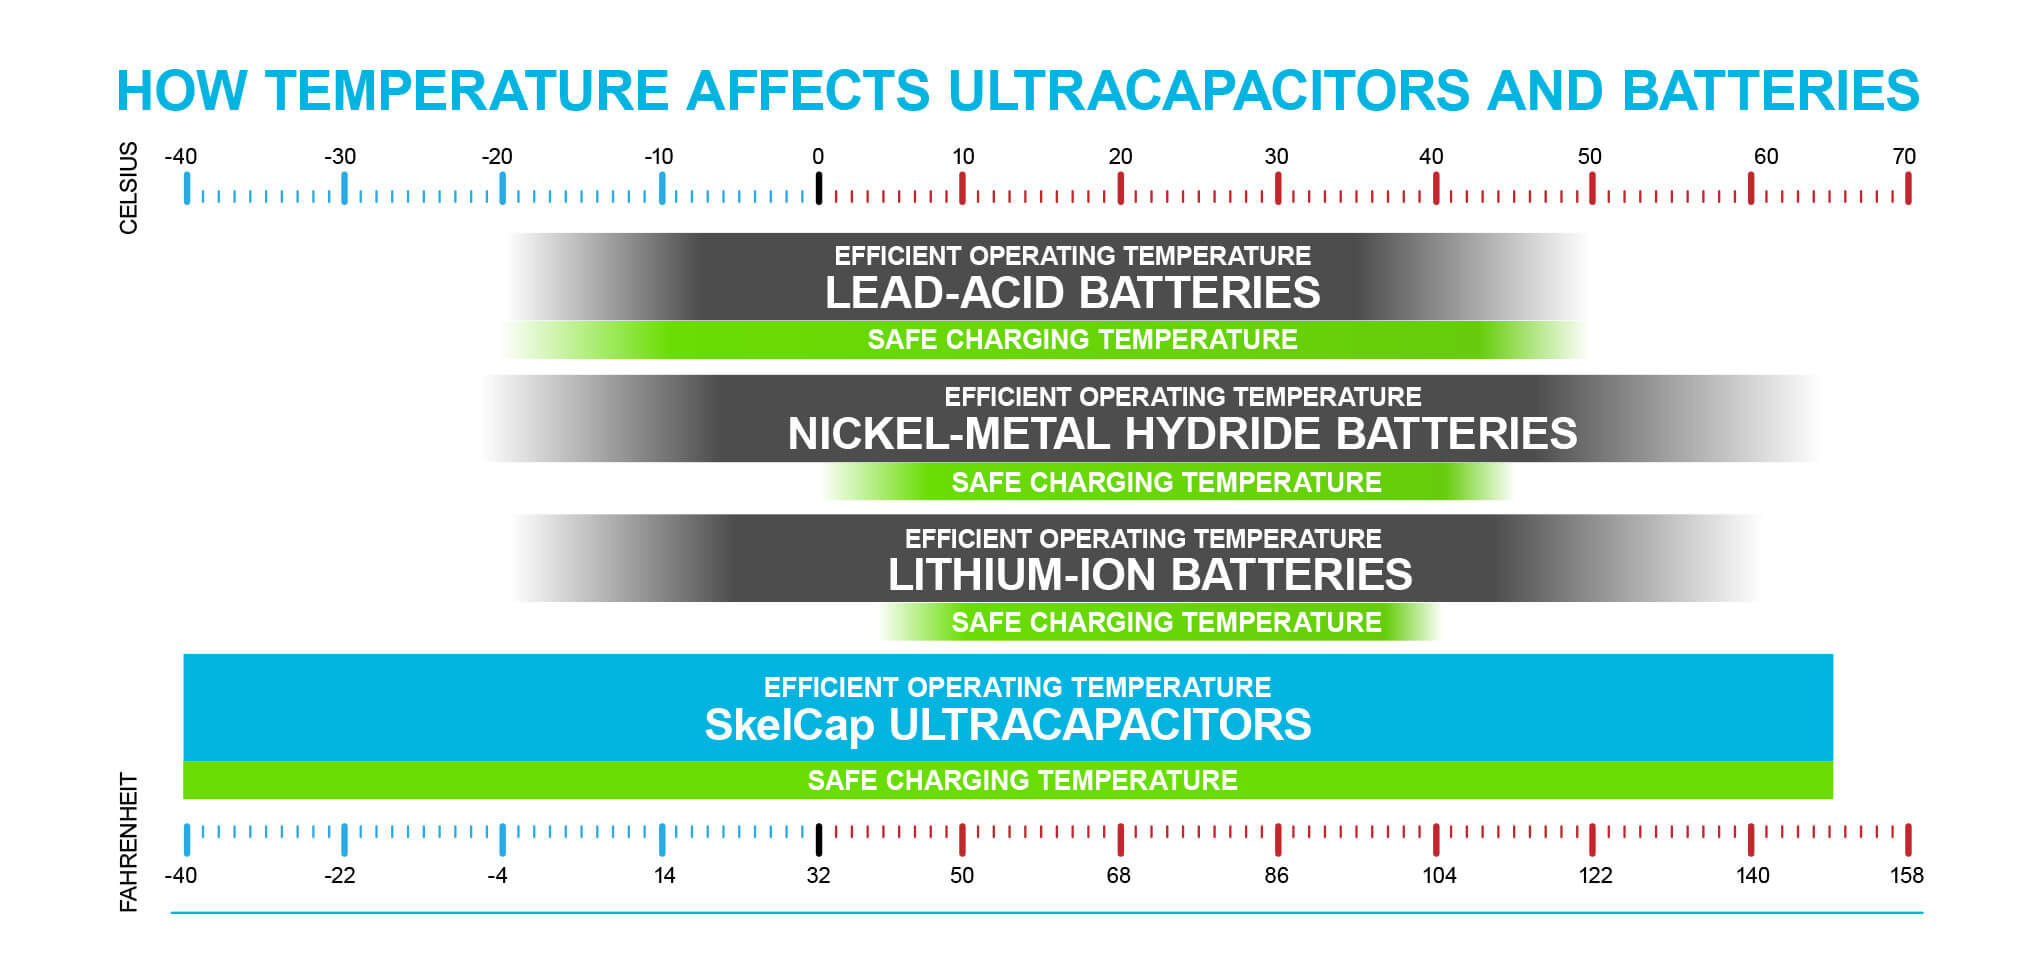 Temperature Affects Ultracapacitors and Batteries